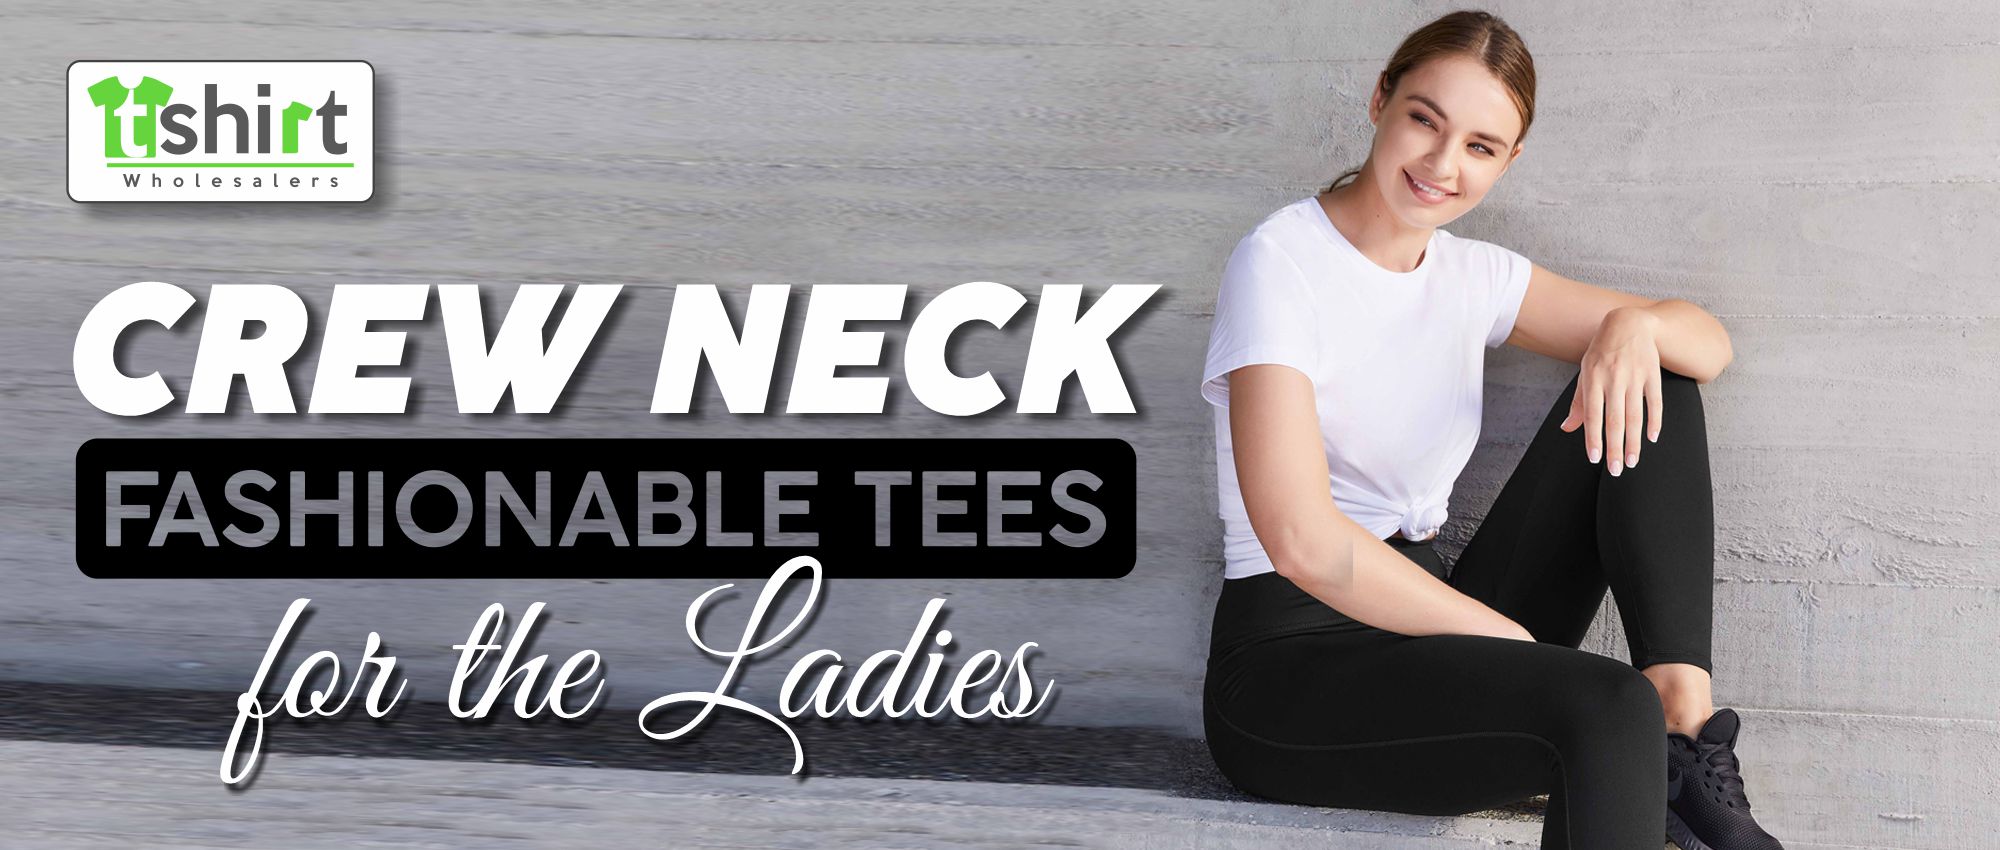 CREW NECK FASHIONABLE TEES FOR THE LADIES